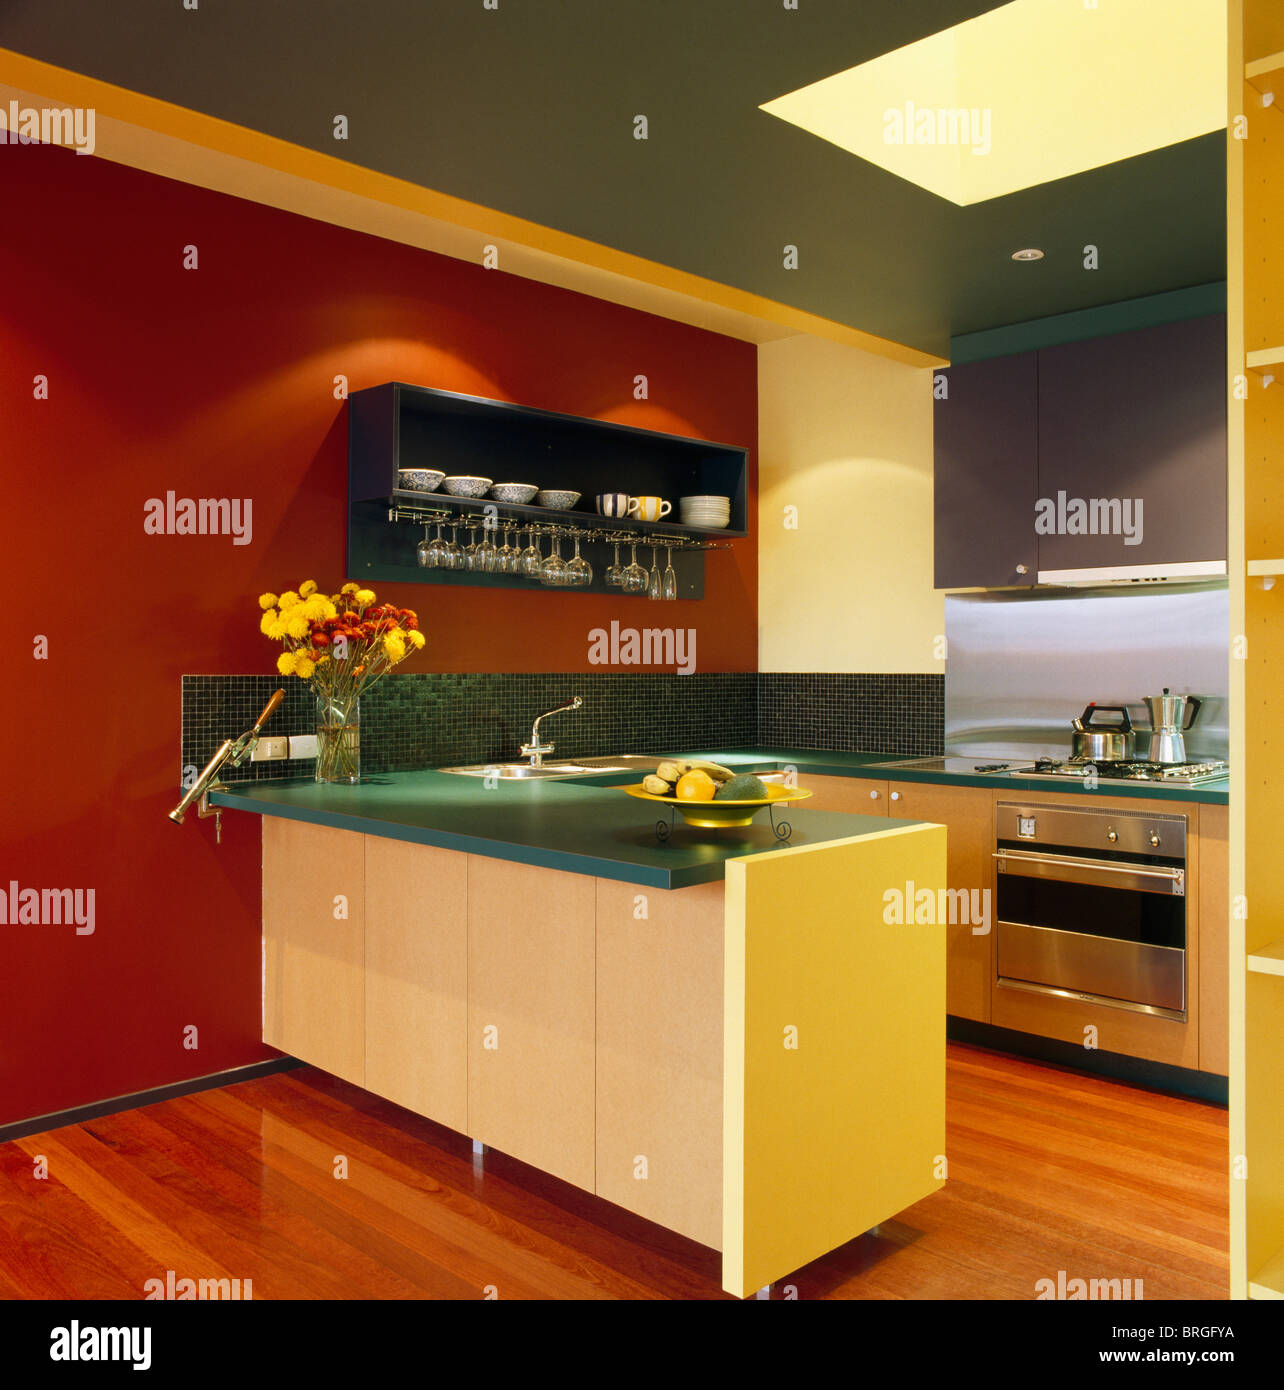 Green worktops on pale yellow and wood fitted units in modern kitchen with red wall Stock Photo